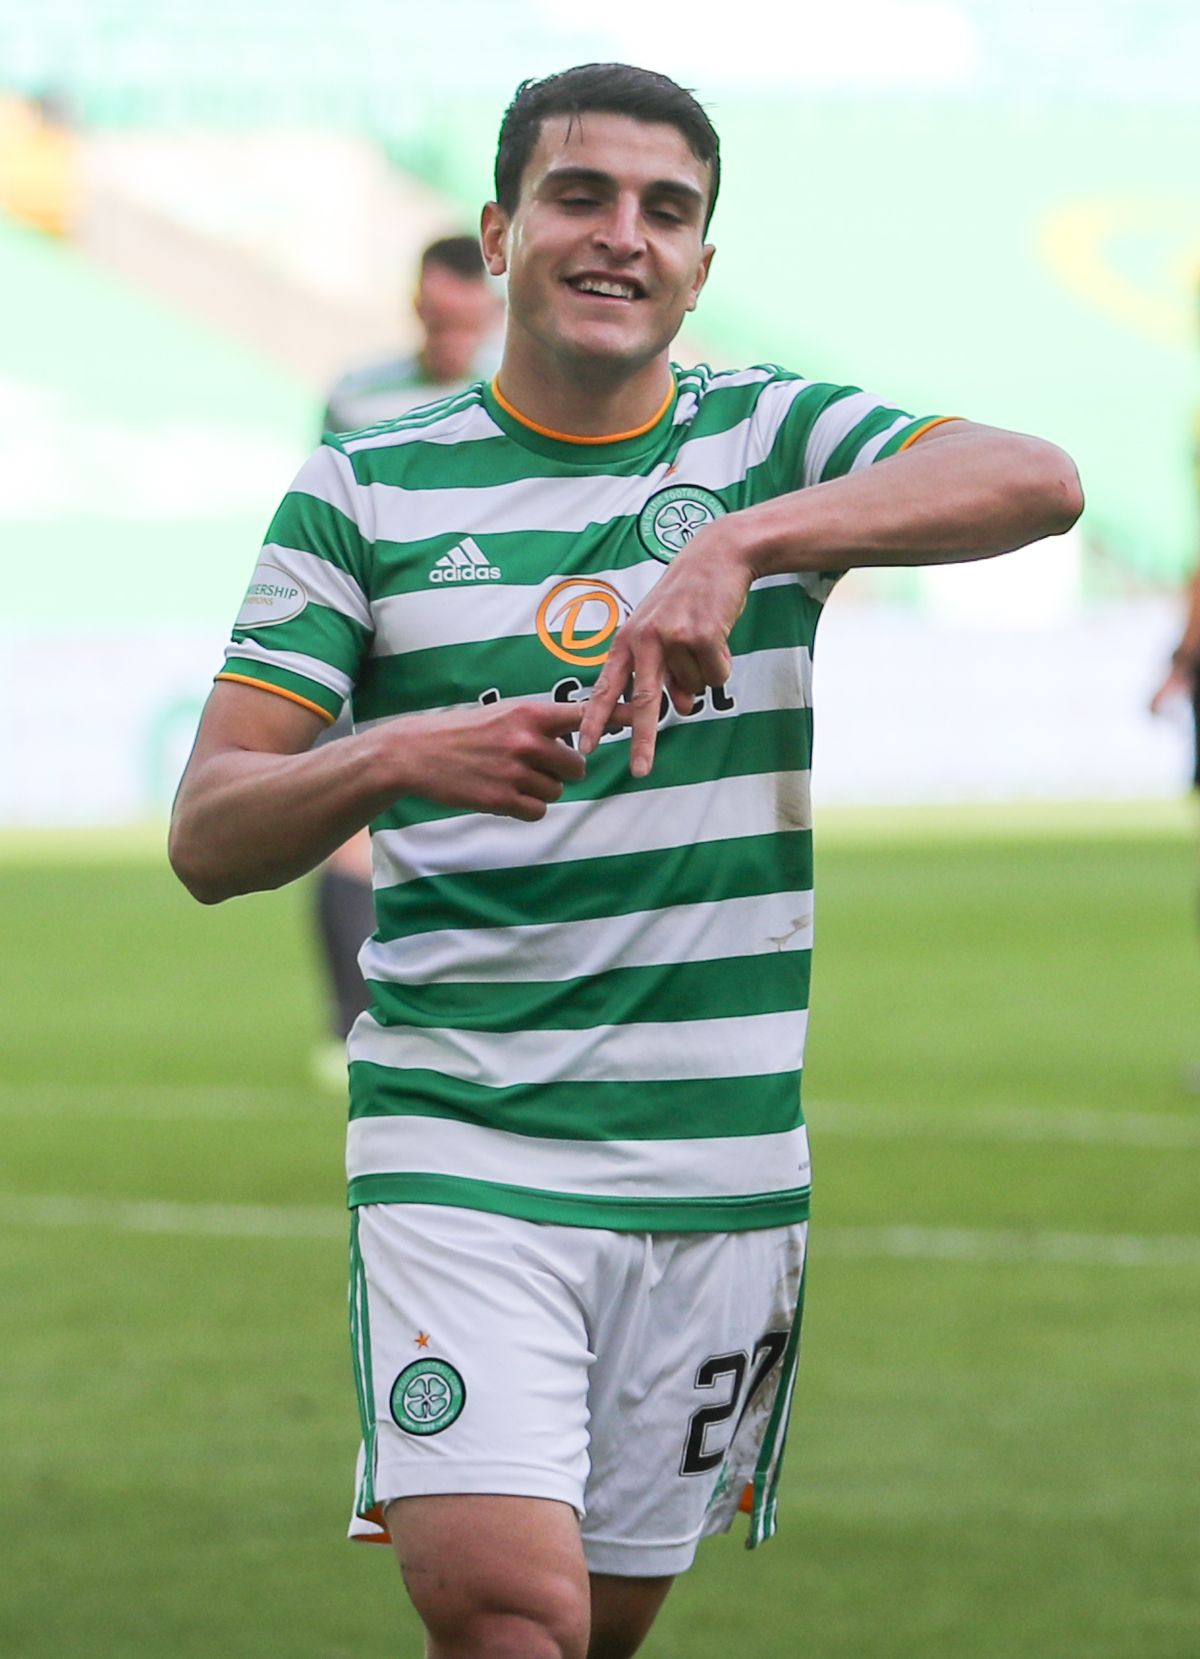 Winning is all that matters to Celtic winger Mohamed Elyounoussi